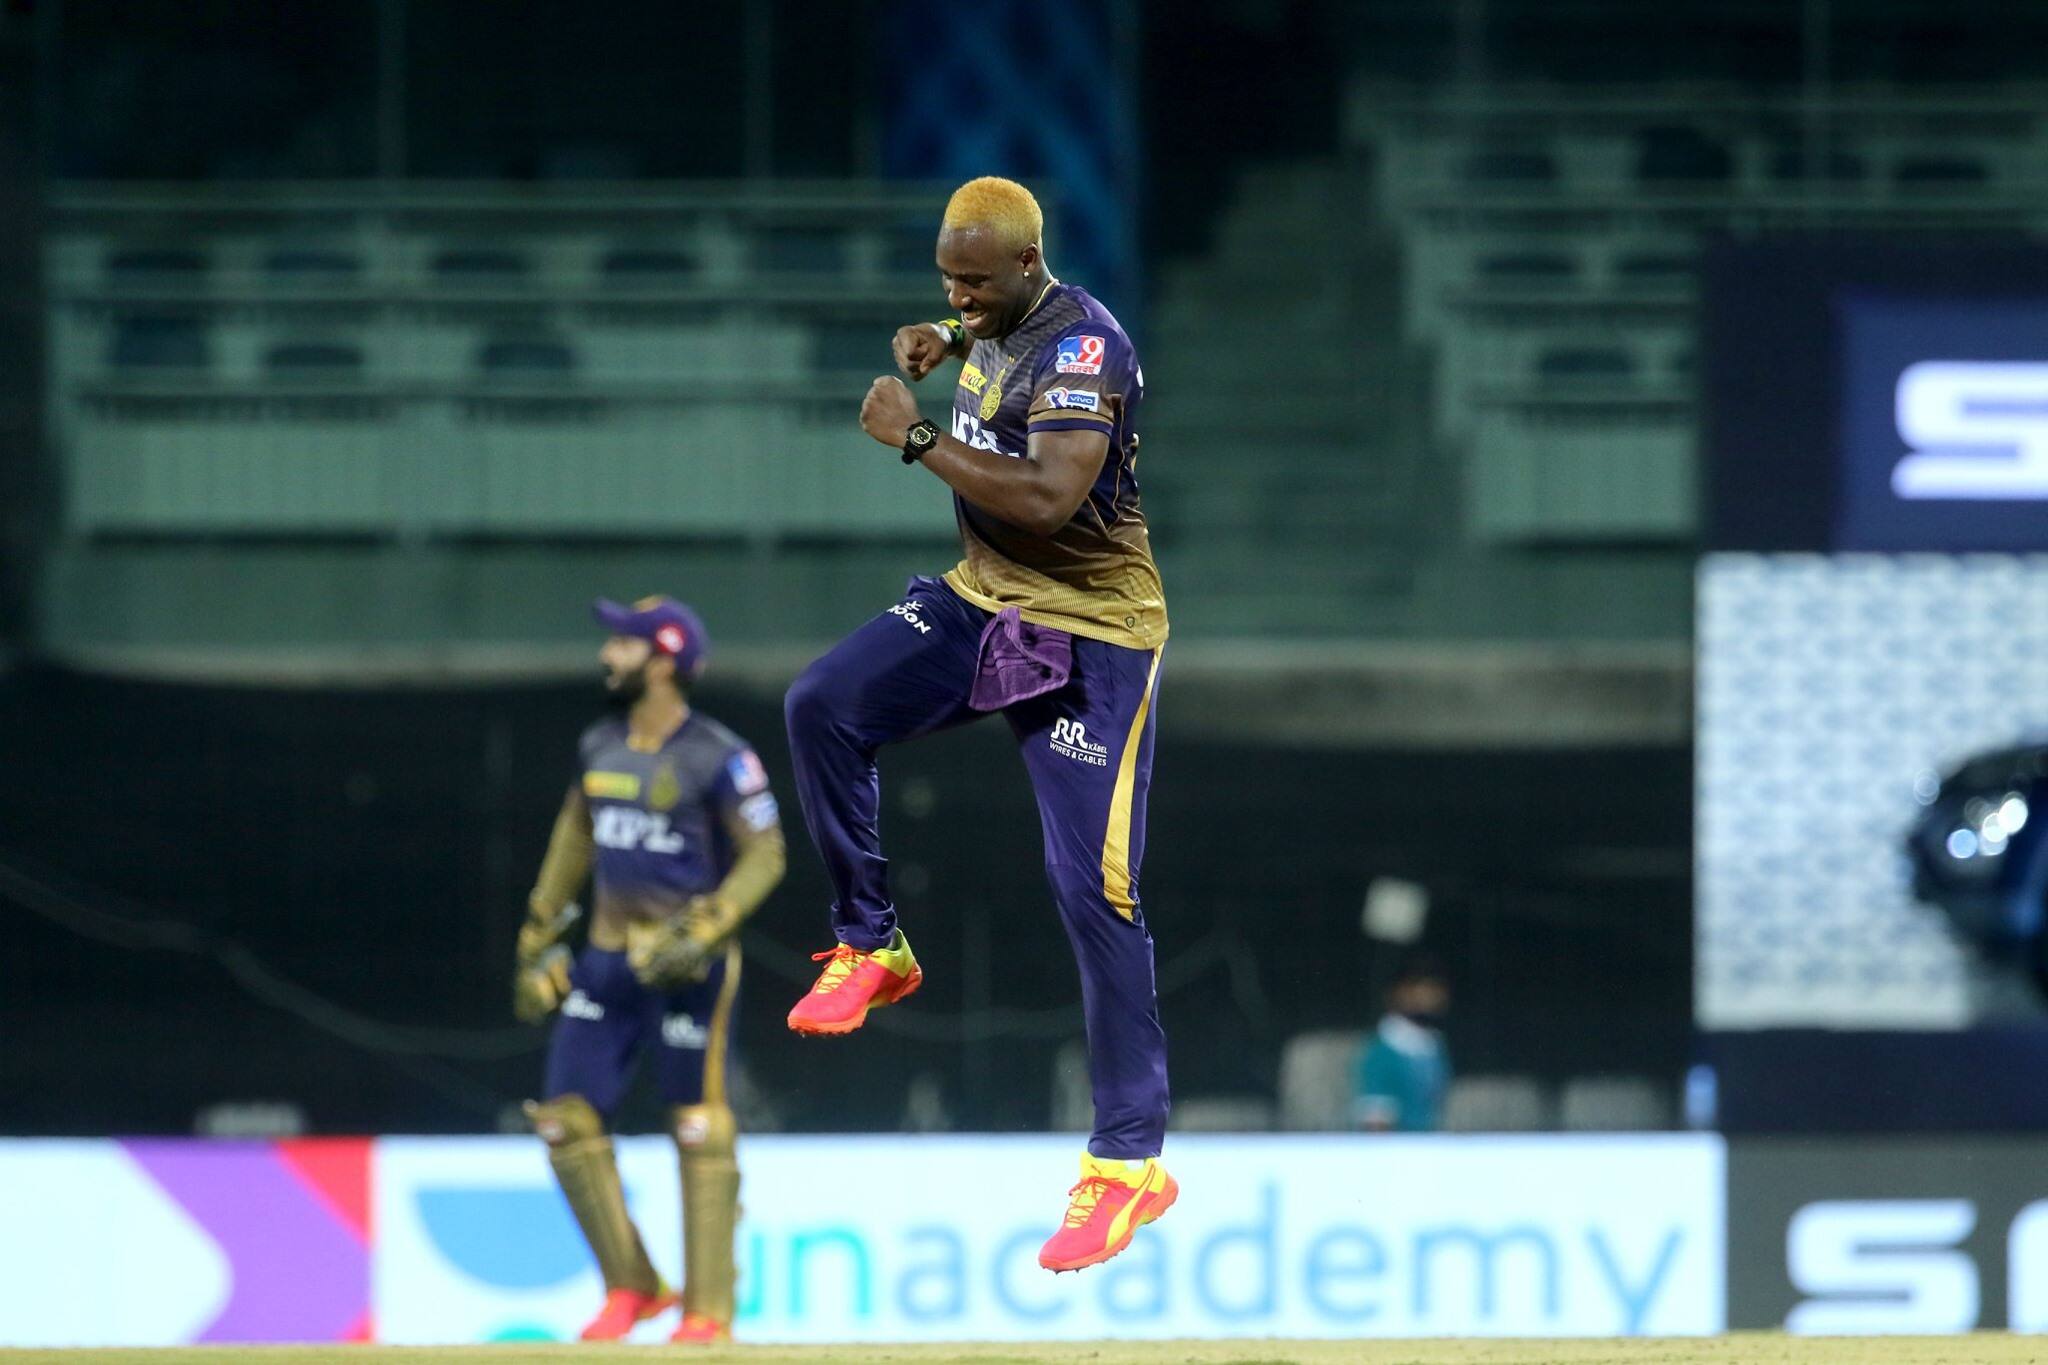 Kolkata Knight Riders all-rounder Andre Russell celebrates after picking up a wicket against Mumbai Indians in Chennai. (Photo: IPL)